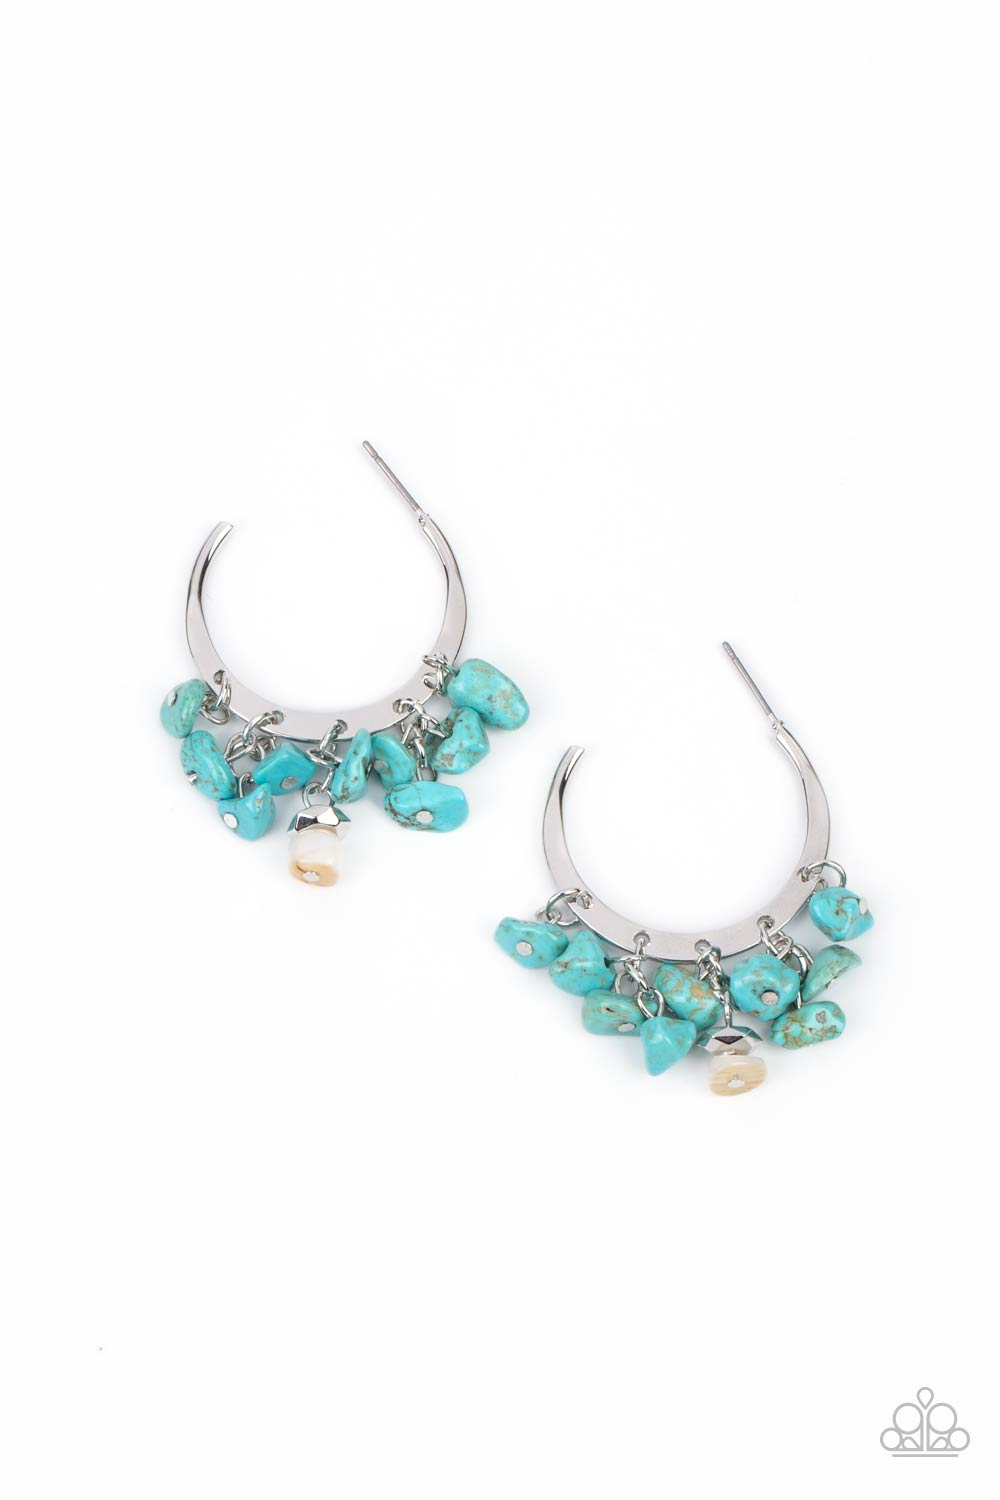 Gorgeously Grounding Turquoise Blue Pebble Hoop Earrings - Paparazzi Accessories- lightbox - CarasShop.com - $5 Jewelry by Cara Jewels